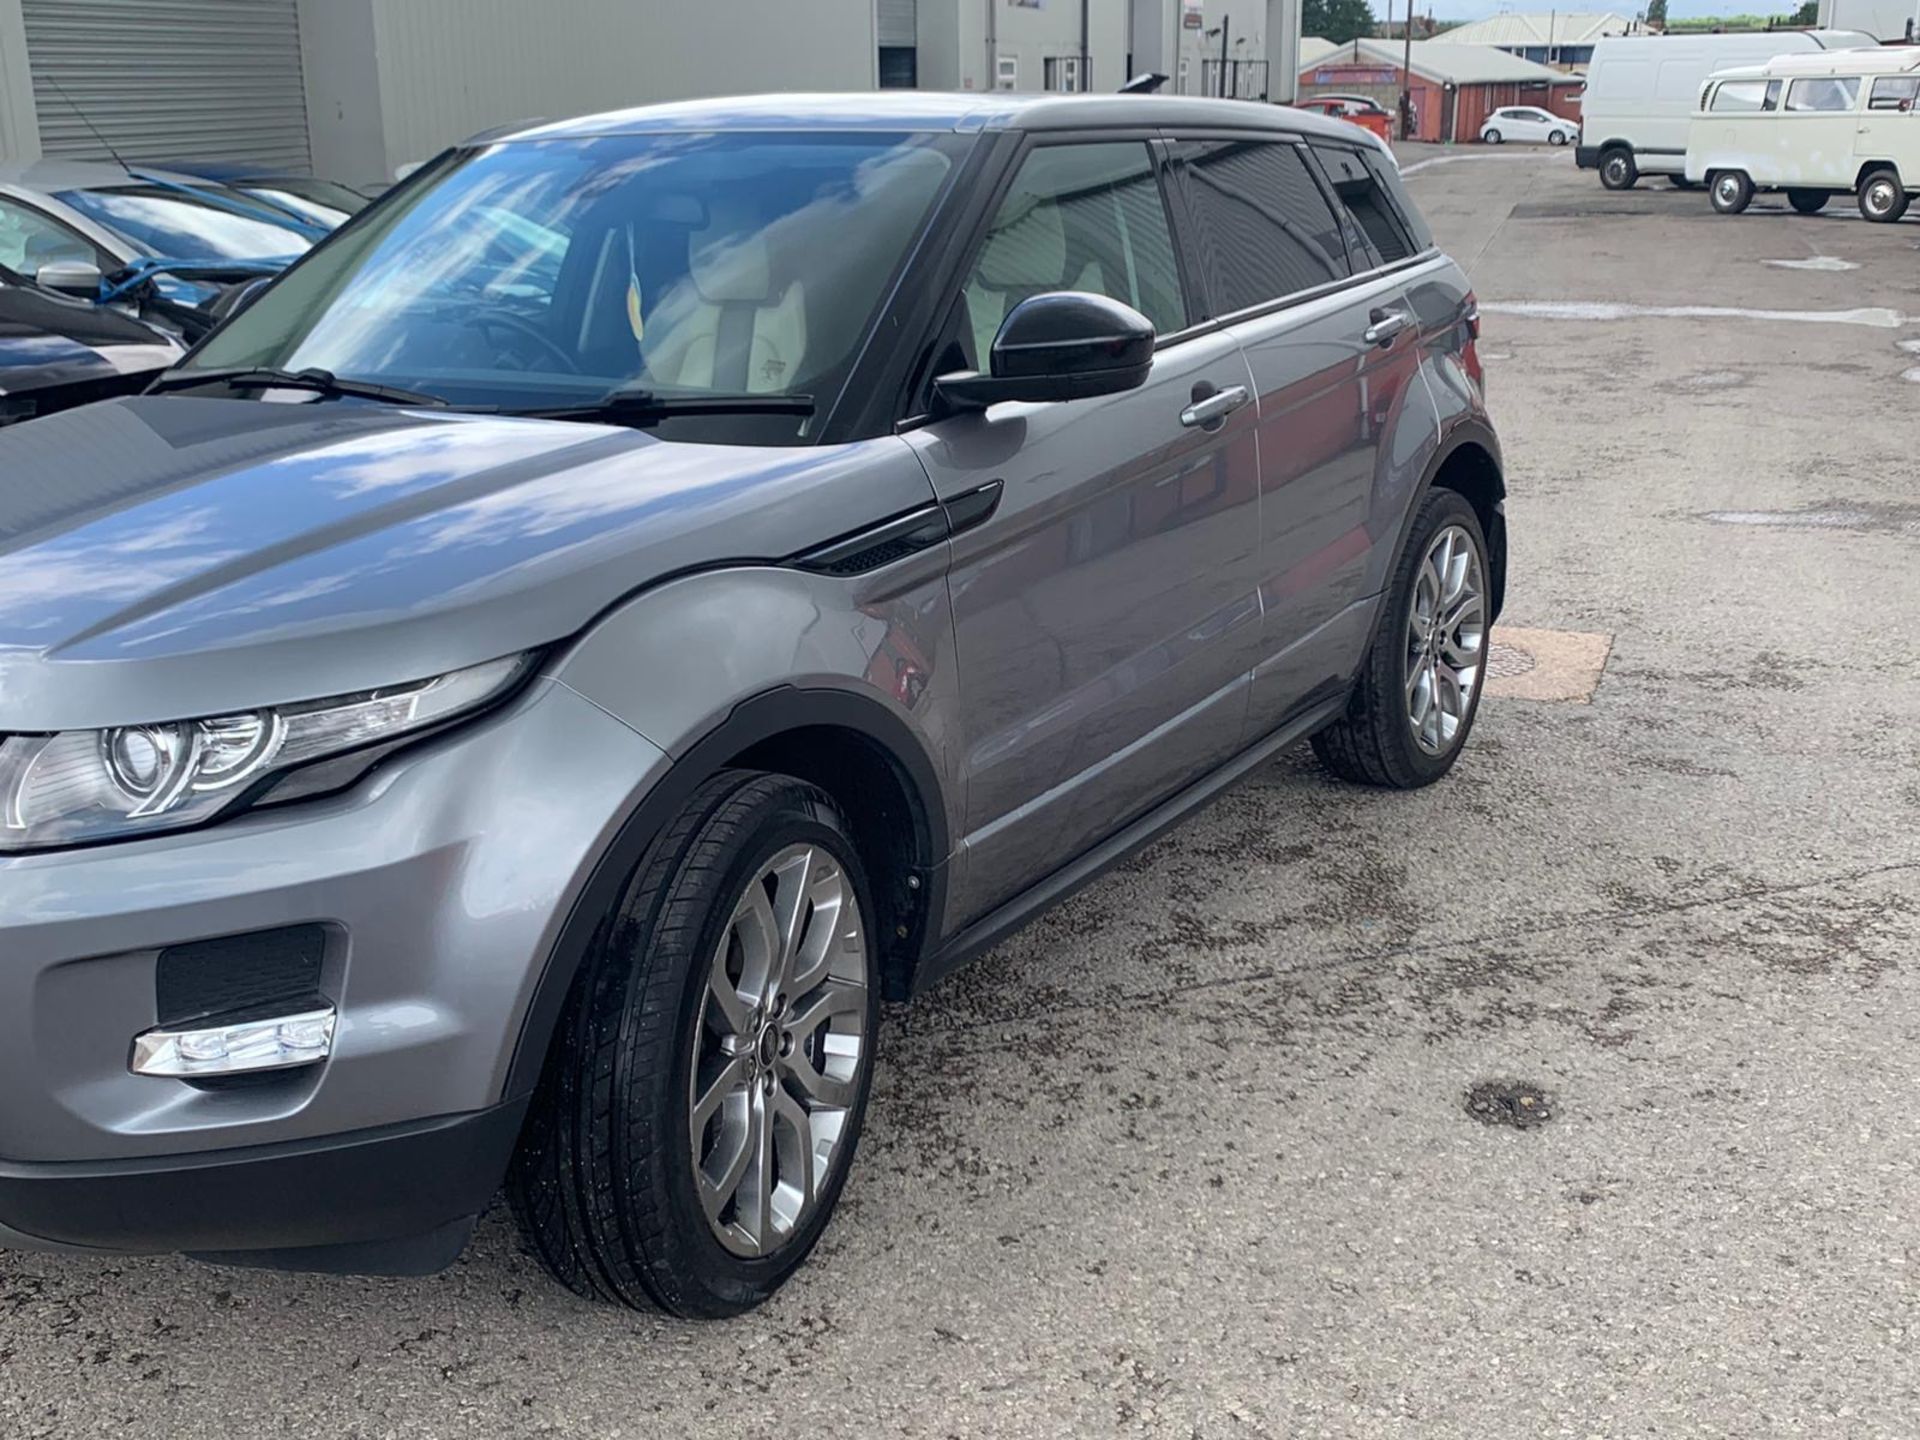 2014/14 REG LAND ROVER RANGE ROVER EVOQUE DYNAMIC S 2.2 DIESEL GREY, SHOWING 2 FORMER KEEPERS - Image 3 of 13